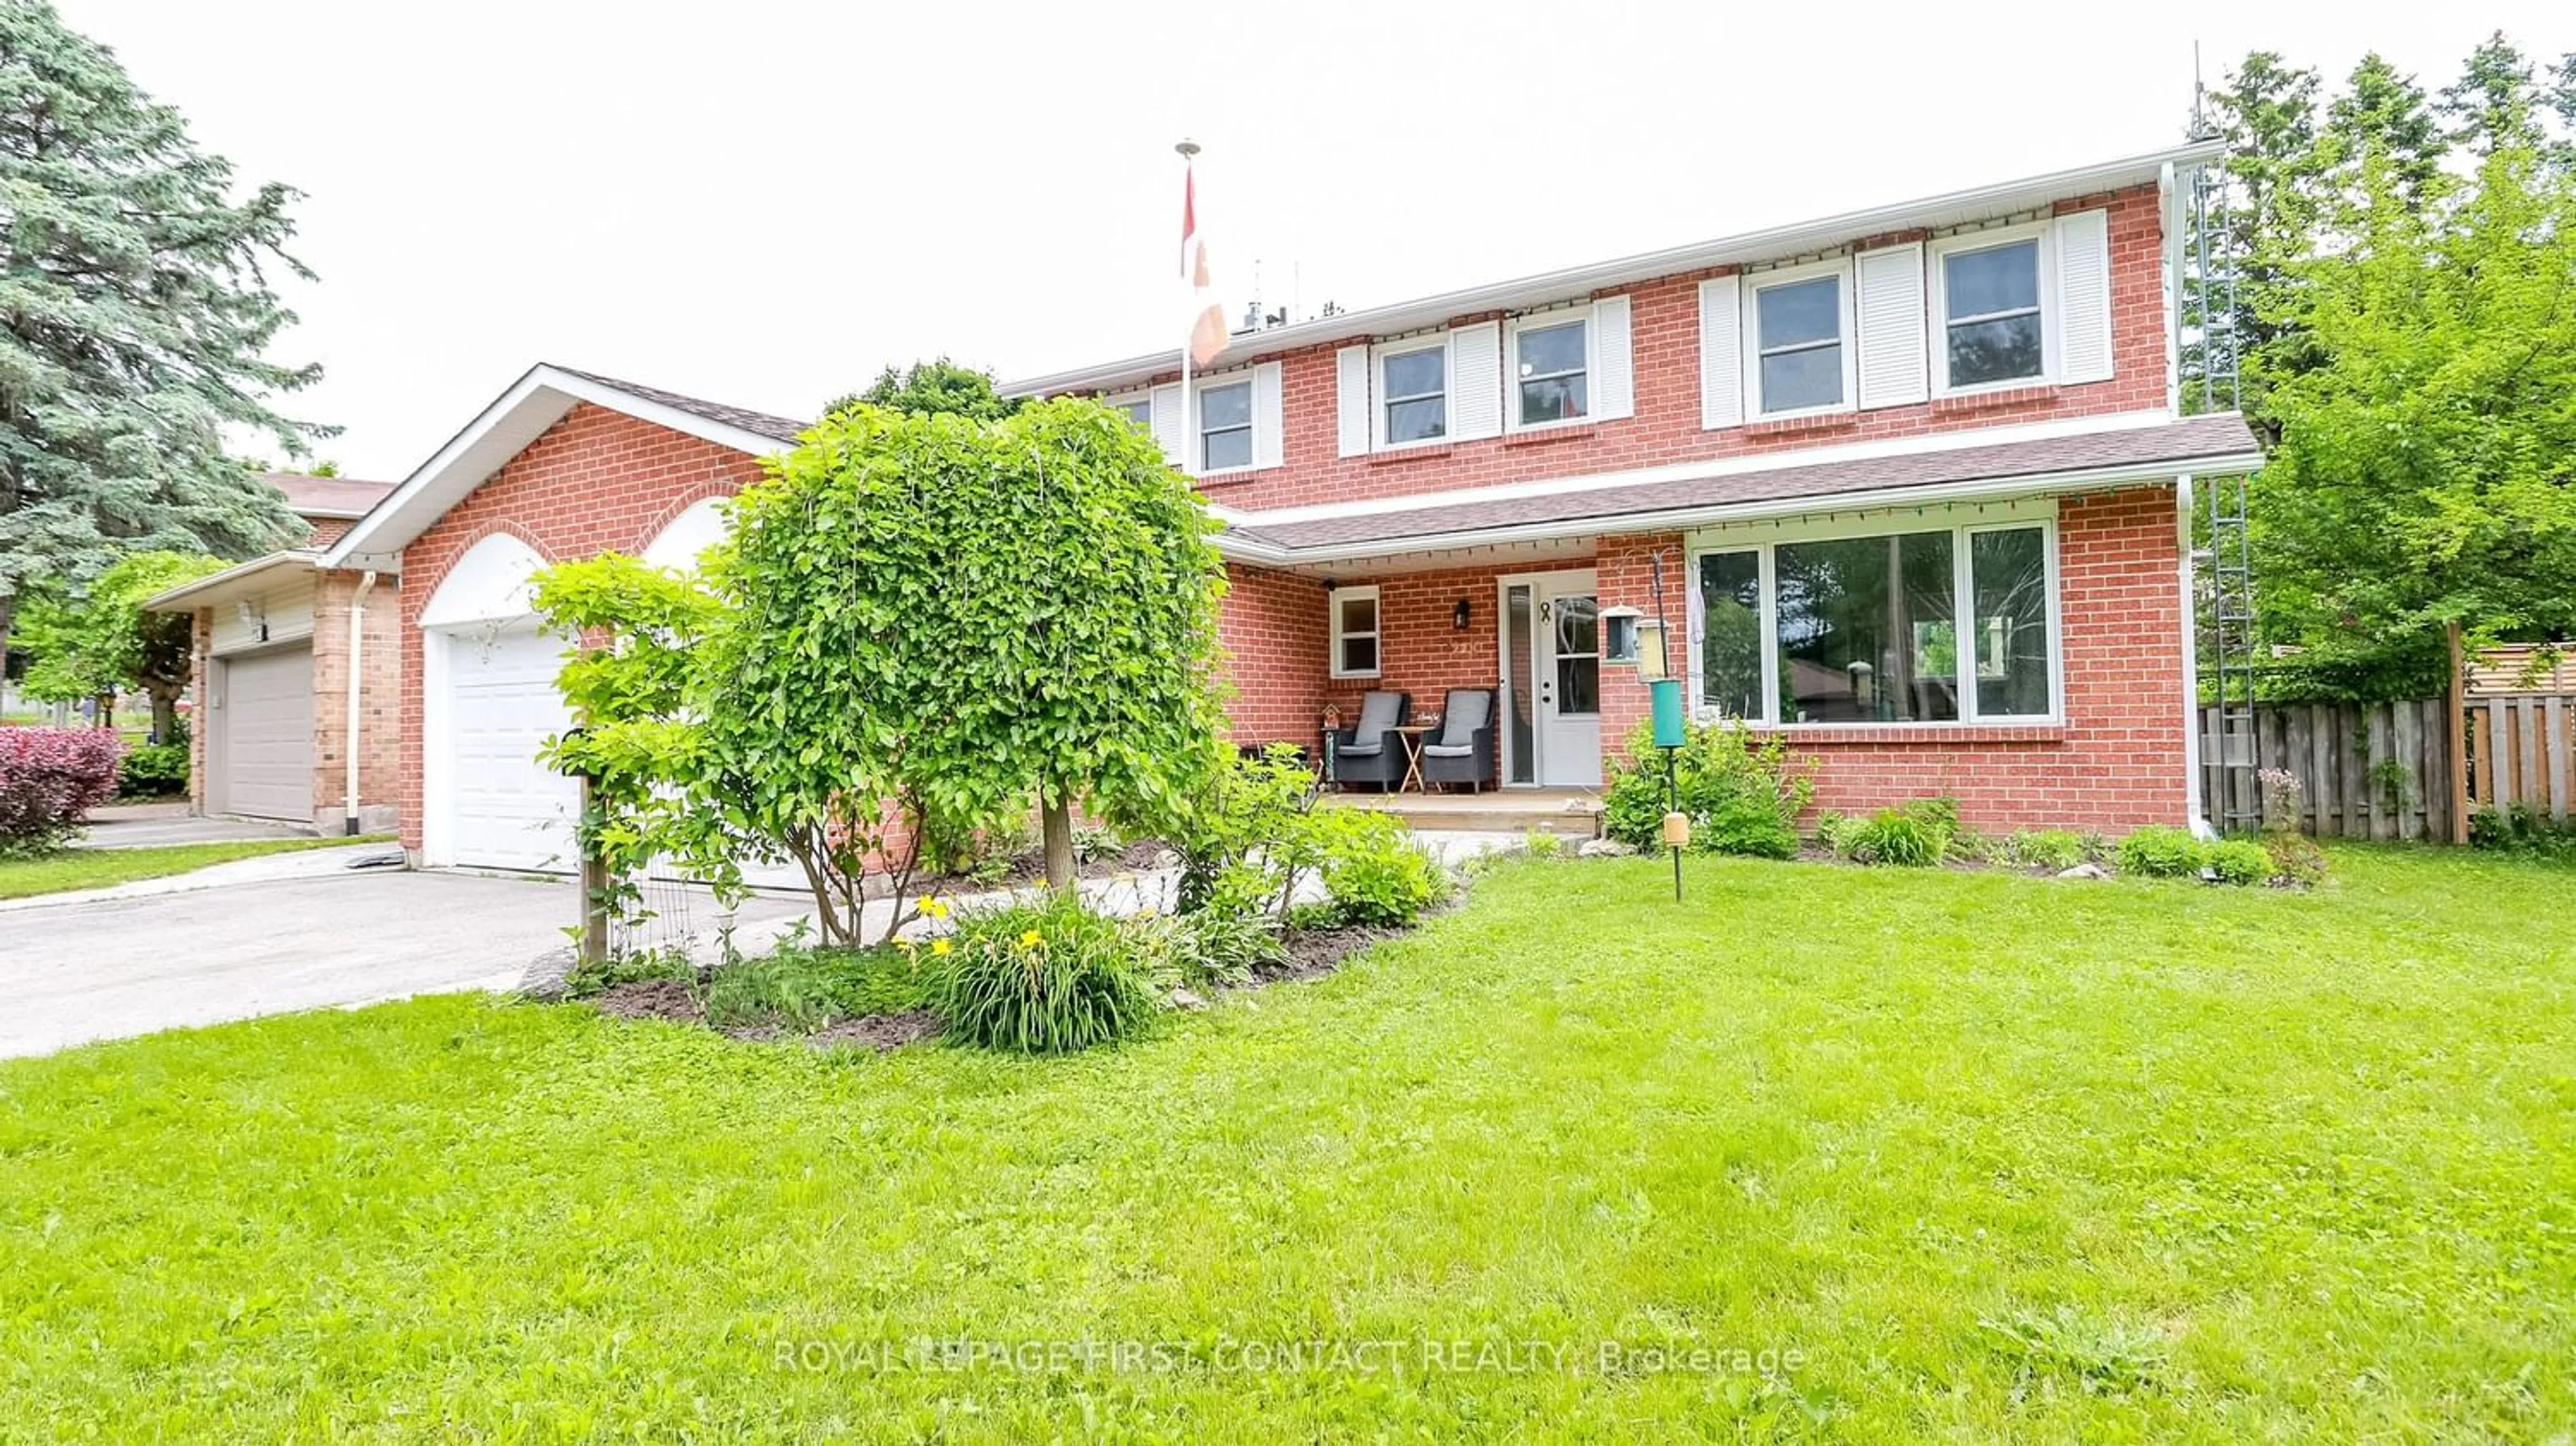 Home with brick exterior material for 228 Browning Tr, Barrie Ontario L4N 5J7